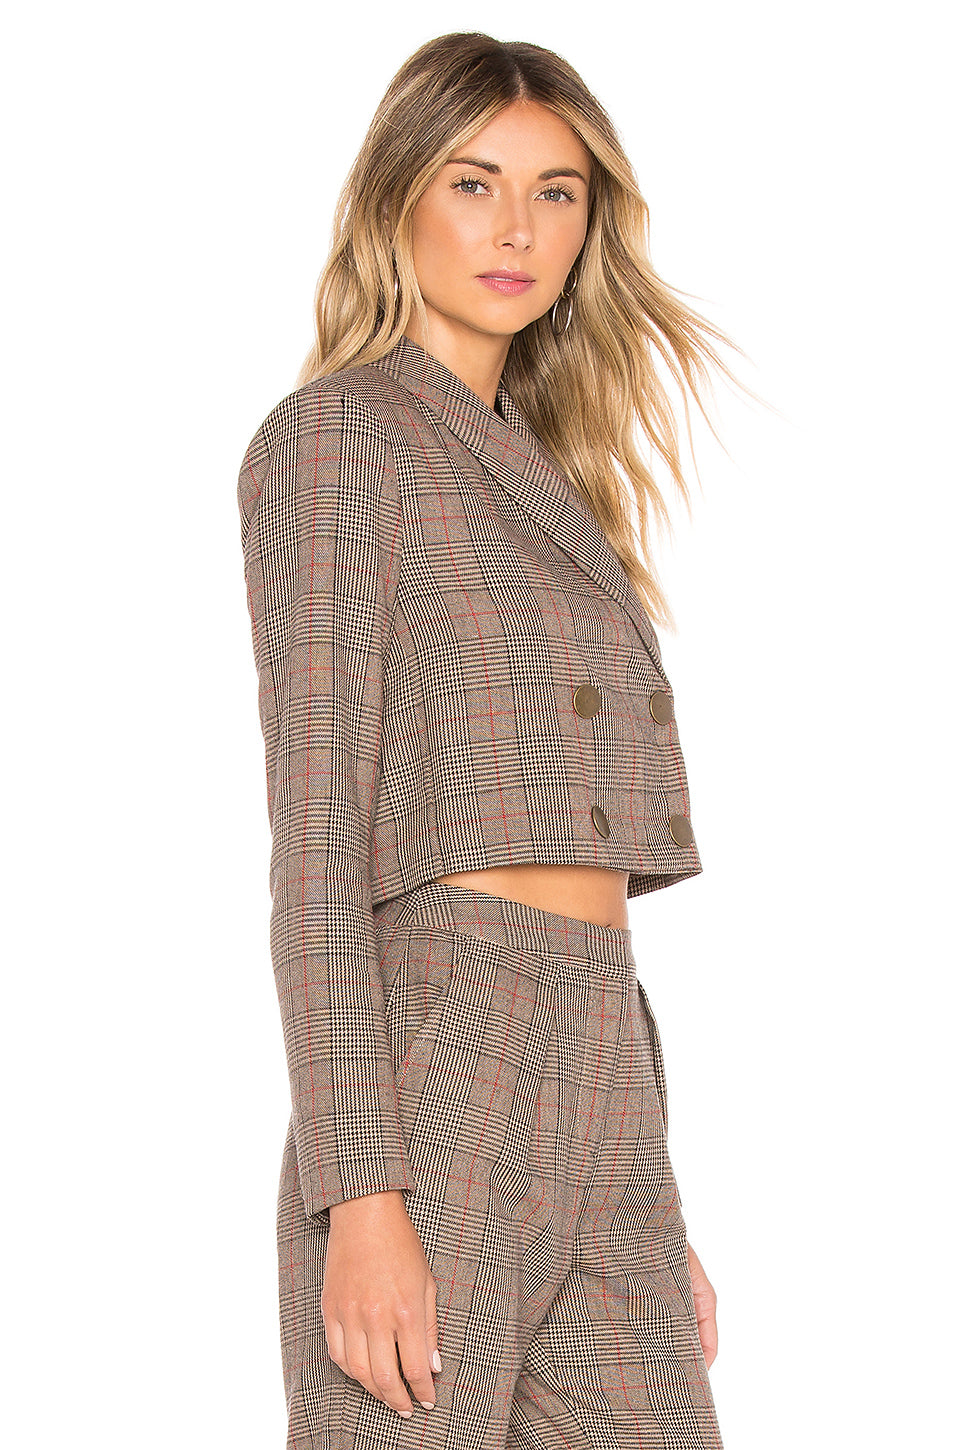 Kendra Jacket in CLASSIC BROWN PLAID